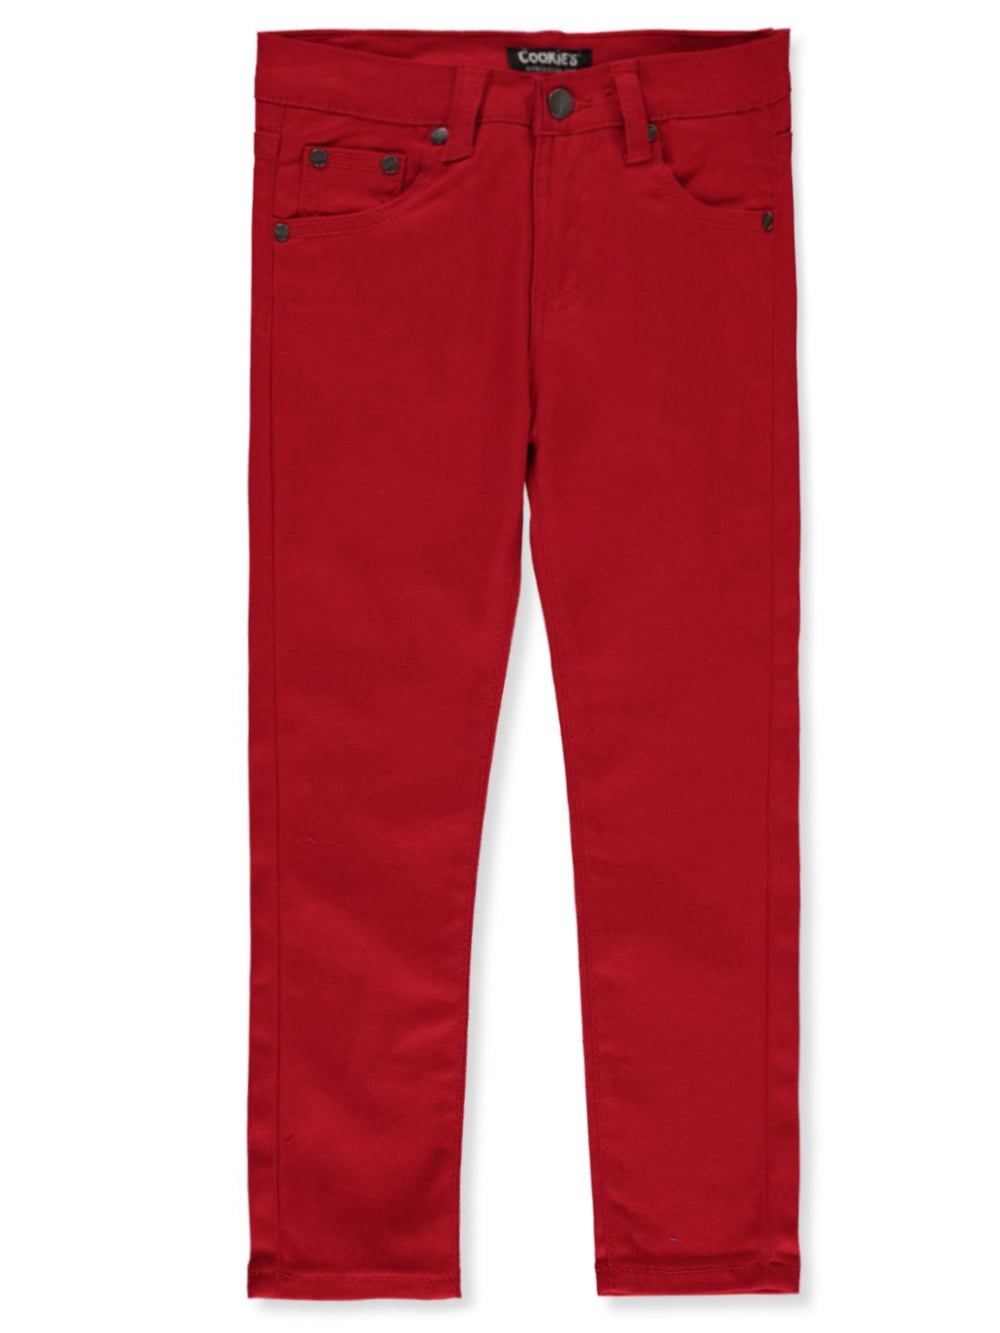 Cookie's Boys' Skinny Stretch Jeans - red, 18 months - Walmart.com